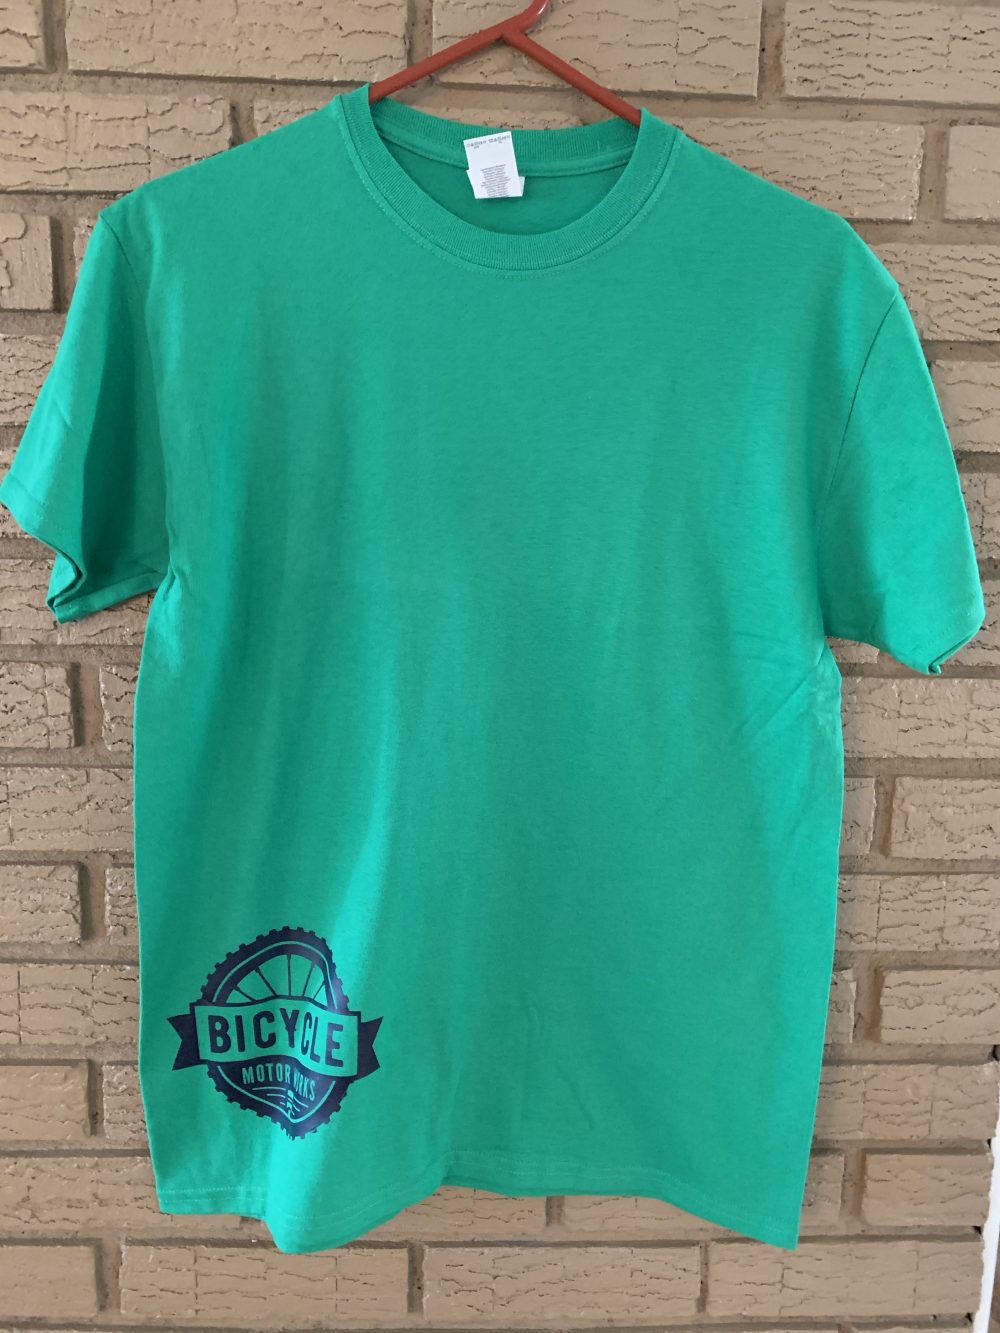 A green shirt with a picture of a beer logo.